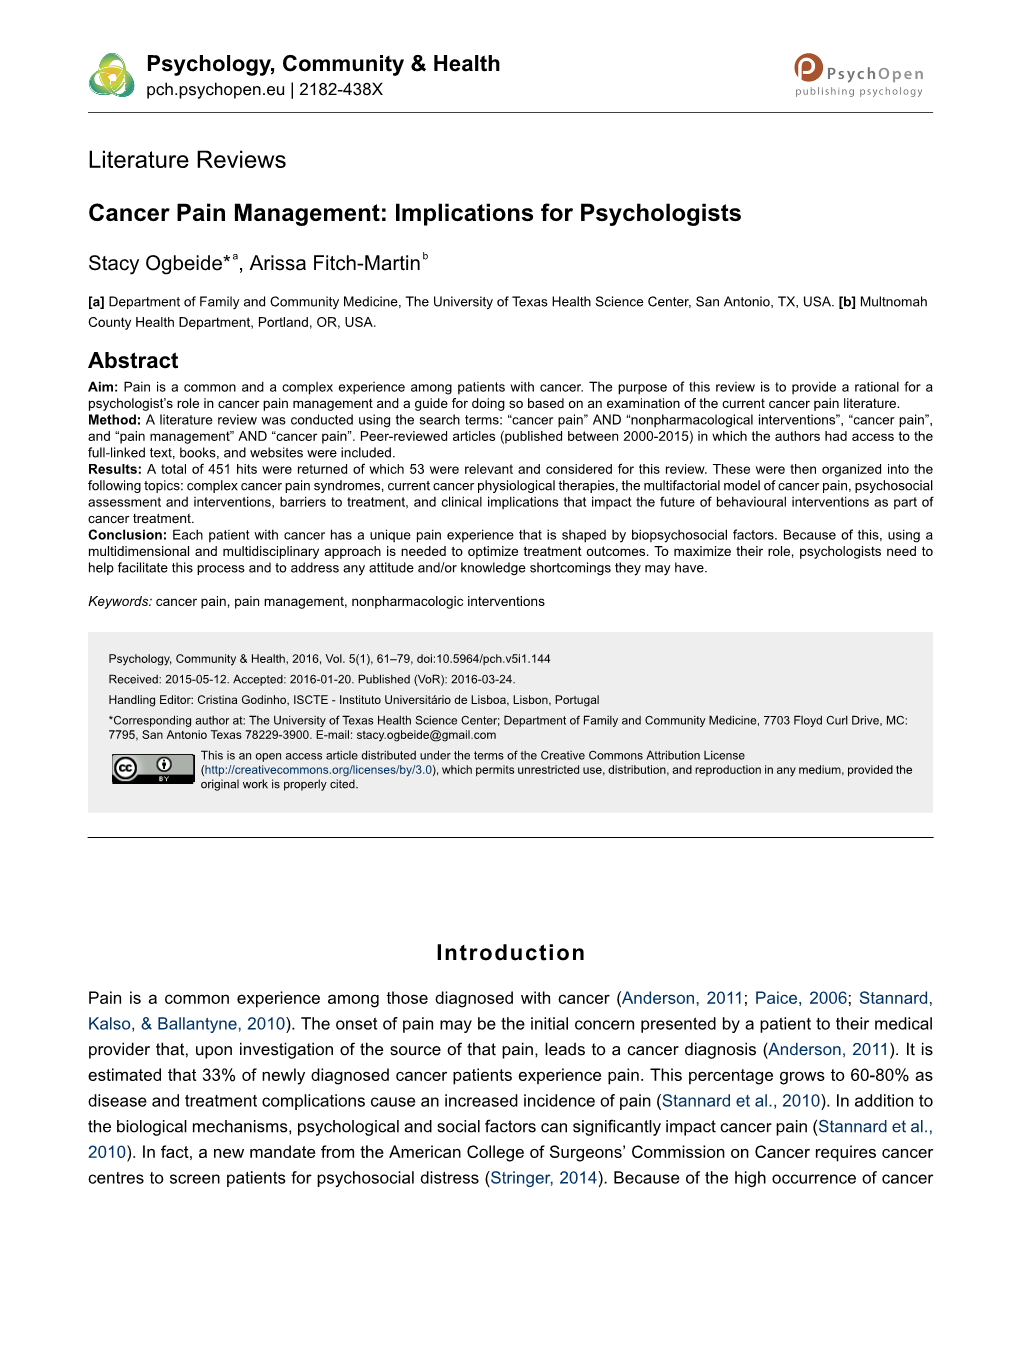 Cancer Pain Management: Implications for Psychologists